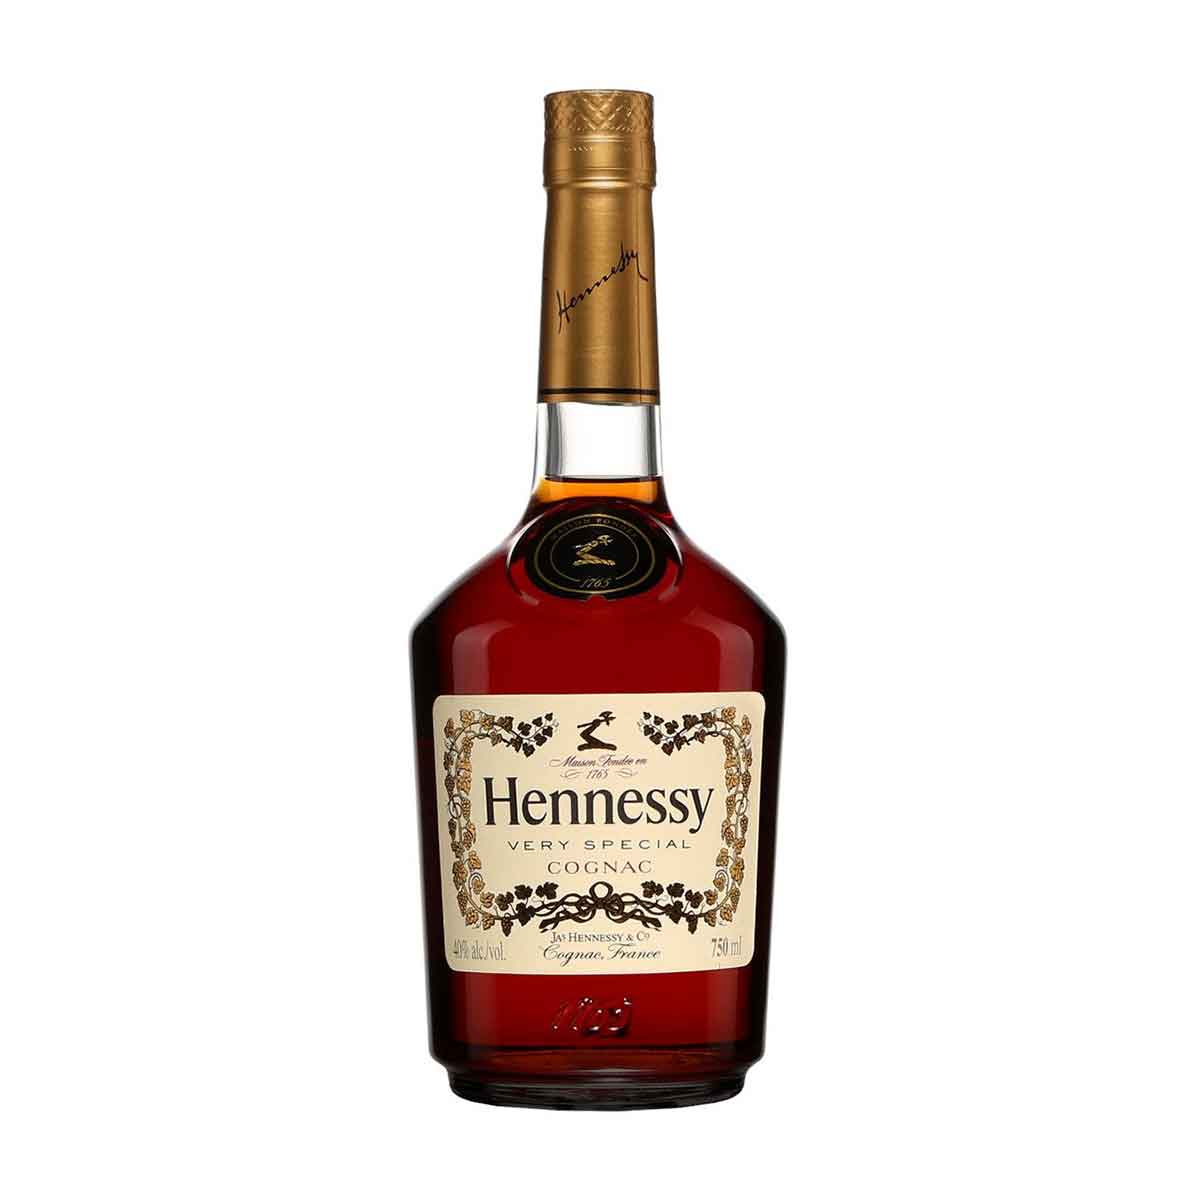 Tag Liquor Stores Delivery BC - Hennessy VS Cognac 750ml ...